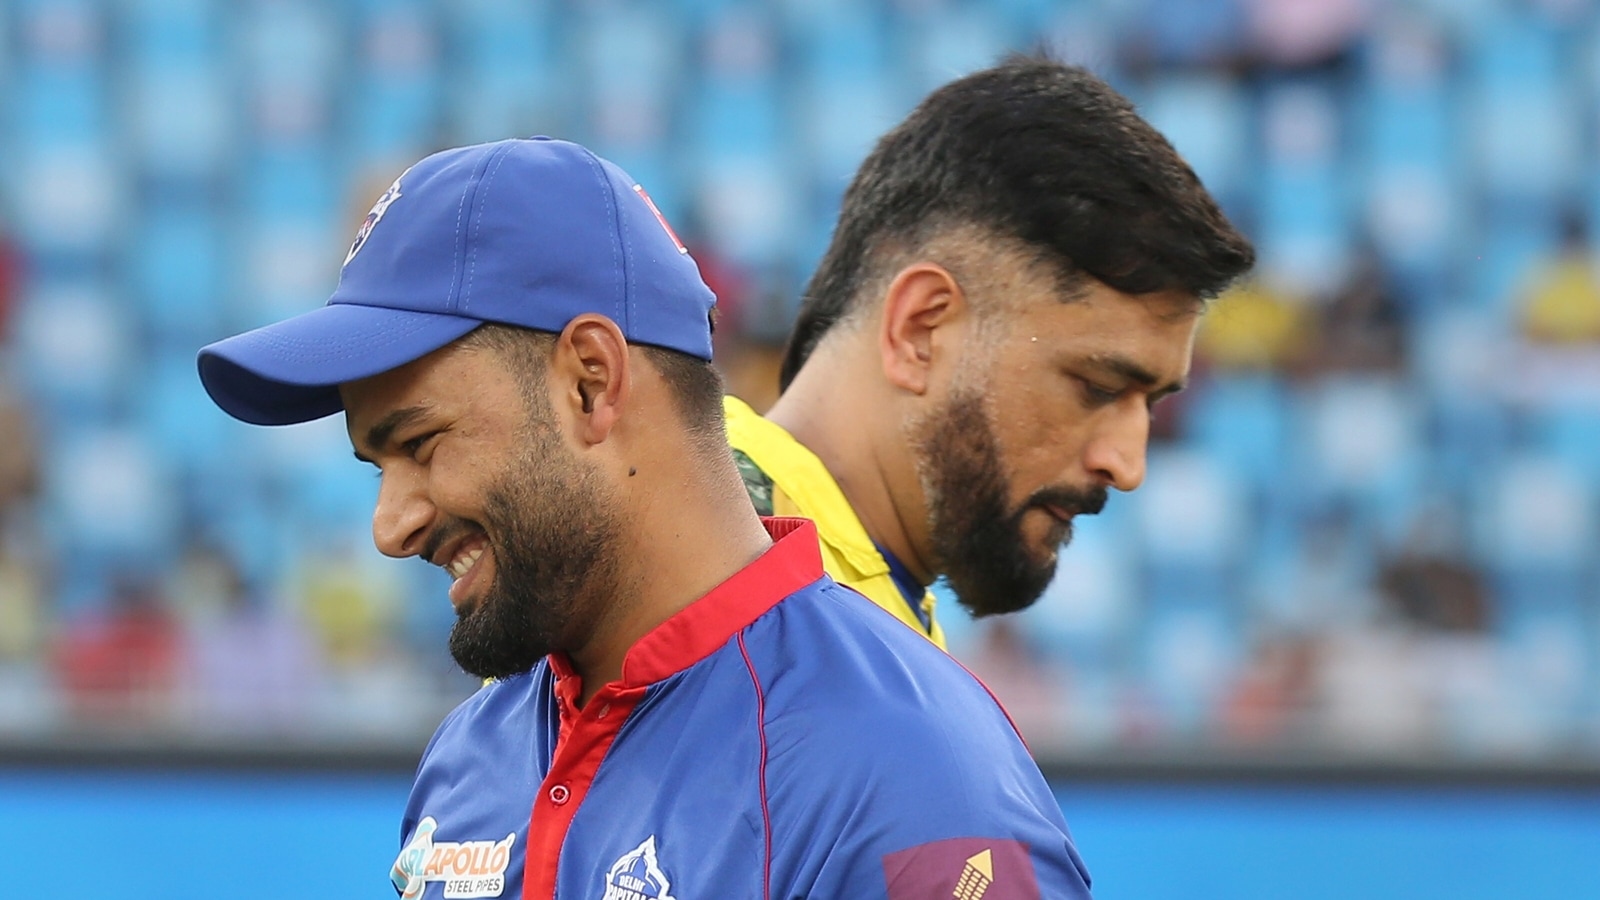 Rishabh Pant bats with 90 My Tuition App for promoting fun and affordable  learning in